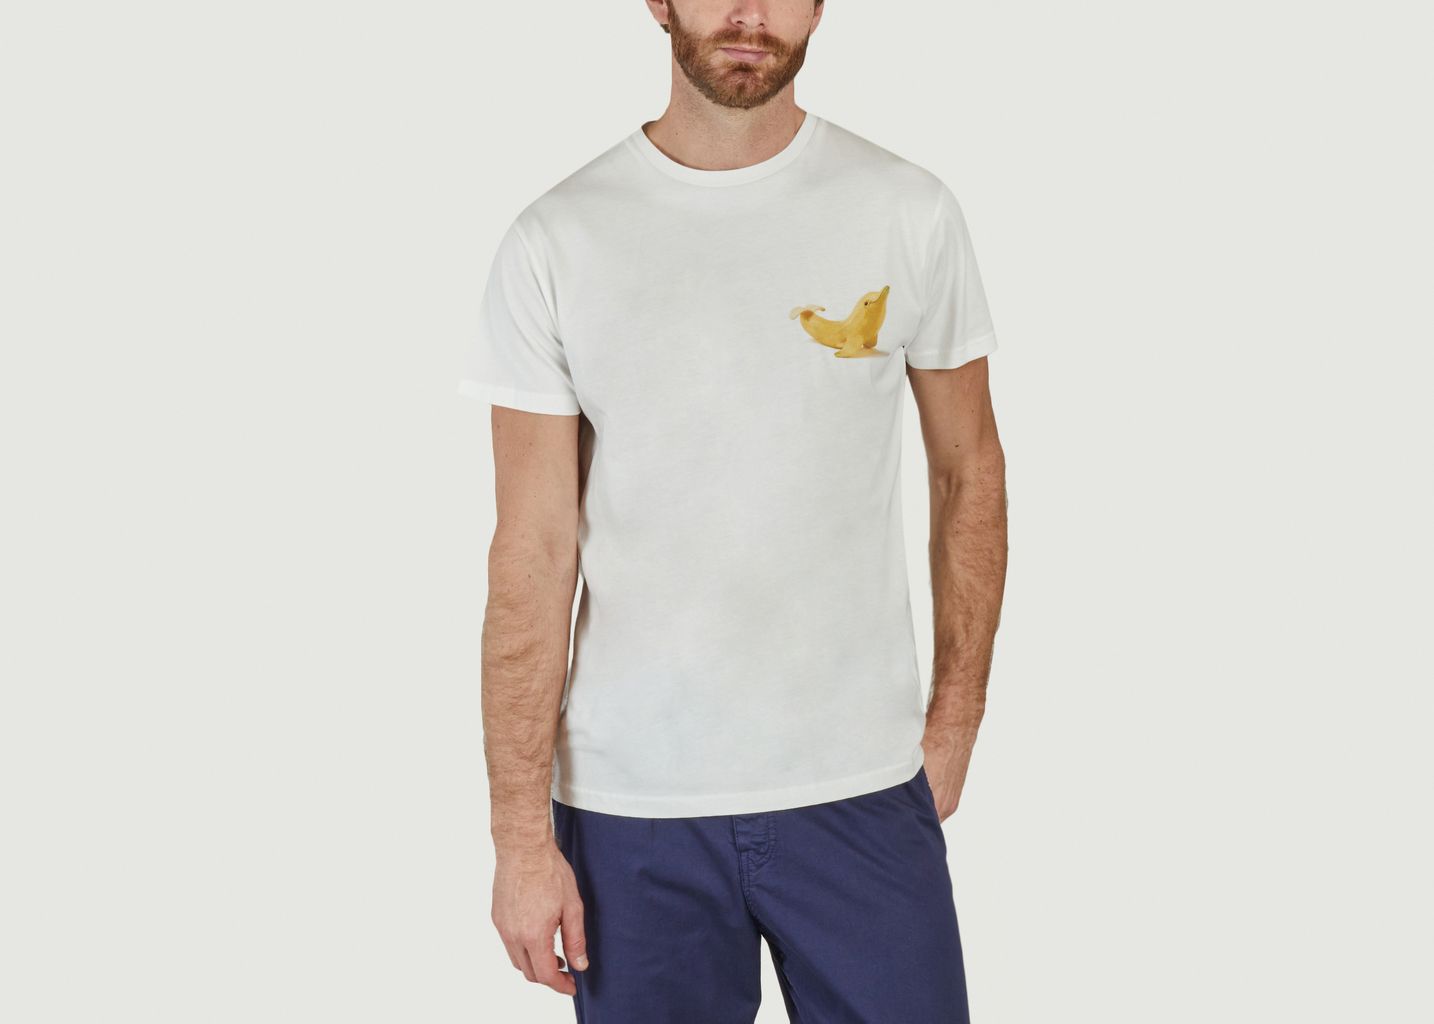 Dolphine T-shirt - Bask in the Sun